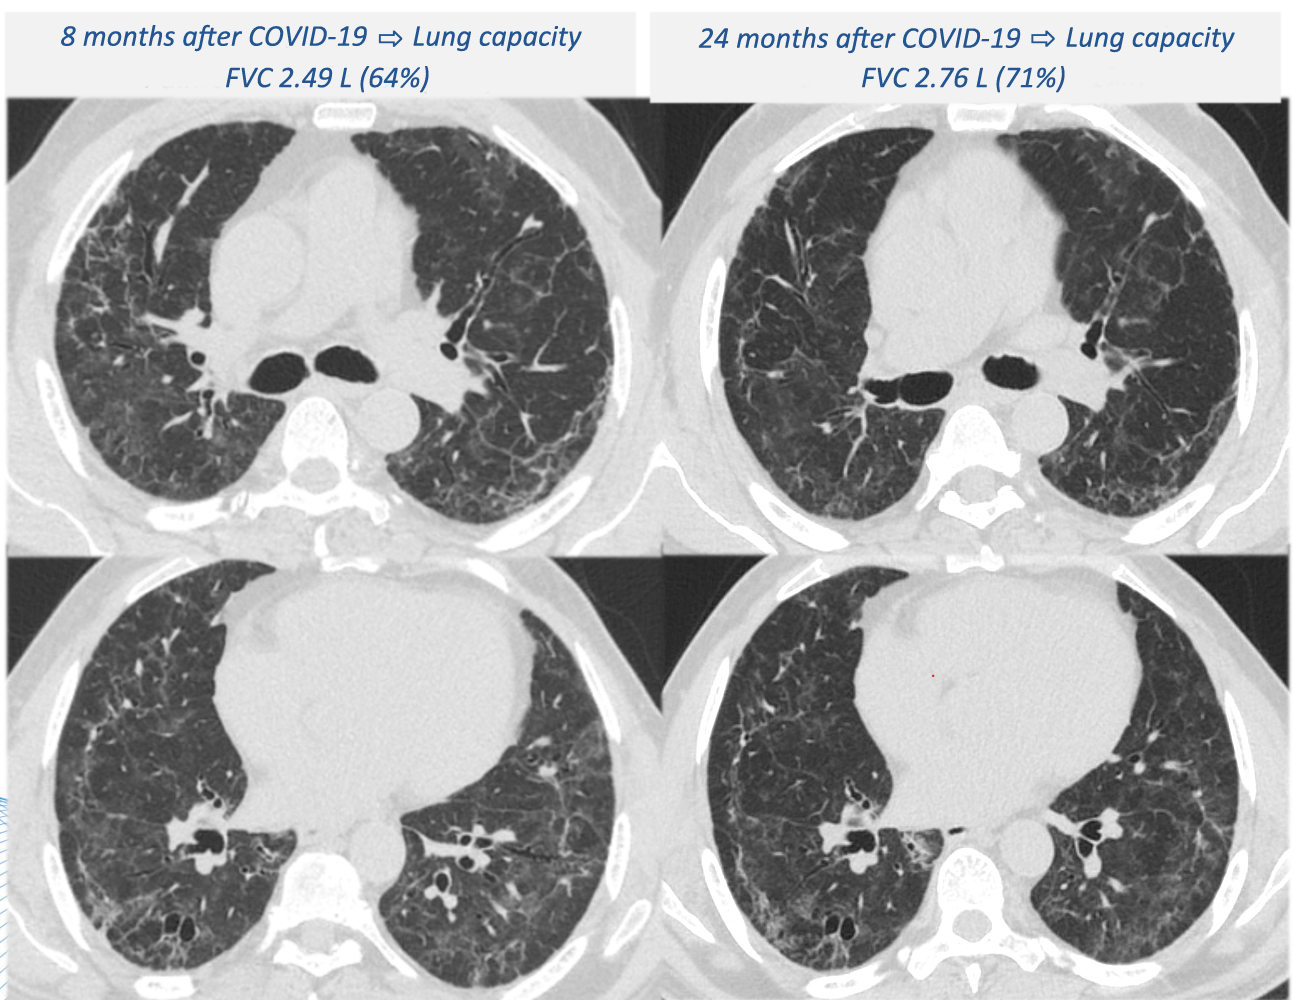 Lung complications can worsen two years after hospitalization for severe COVID-19